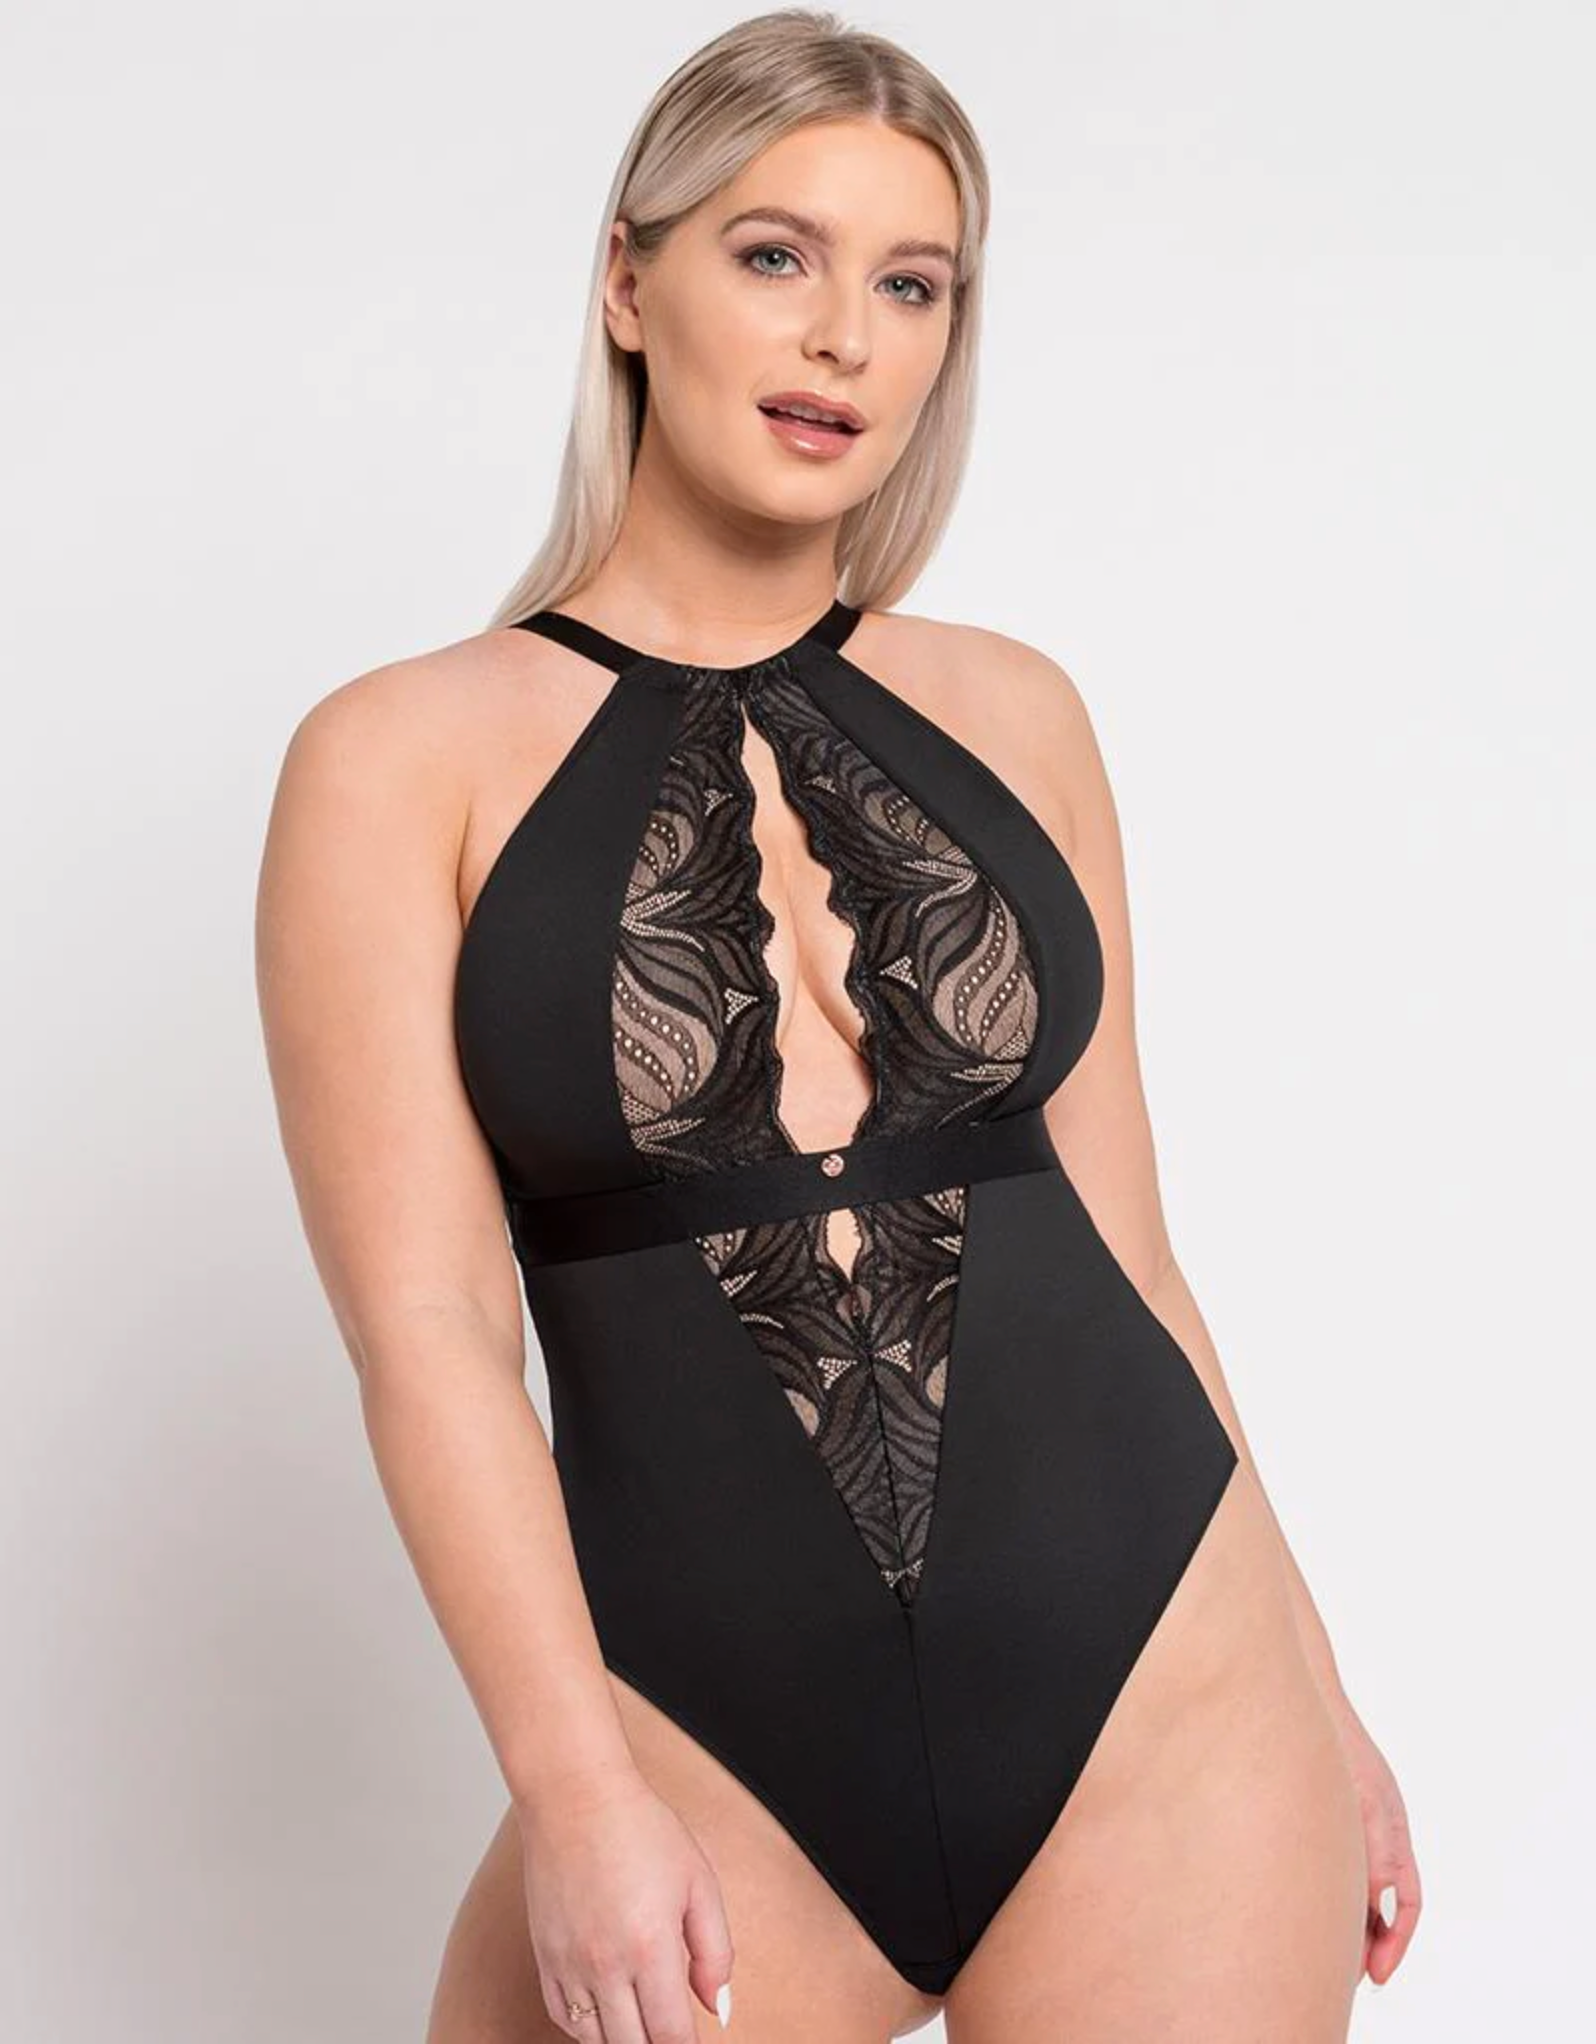 Scantilly by Curvy Kate See-Through Clothing, Sexy Lingerie